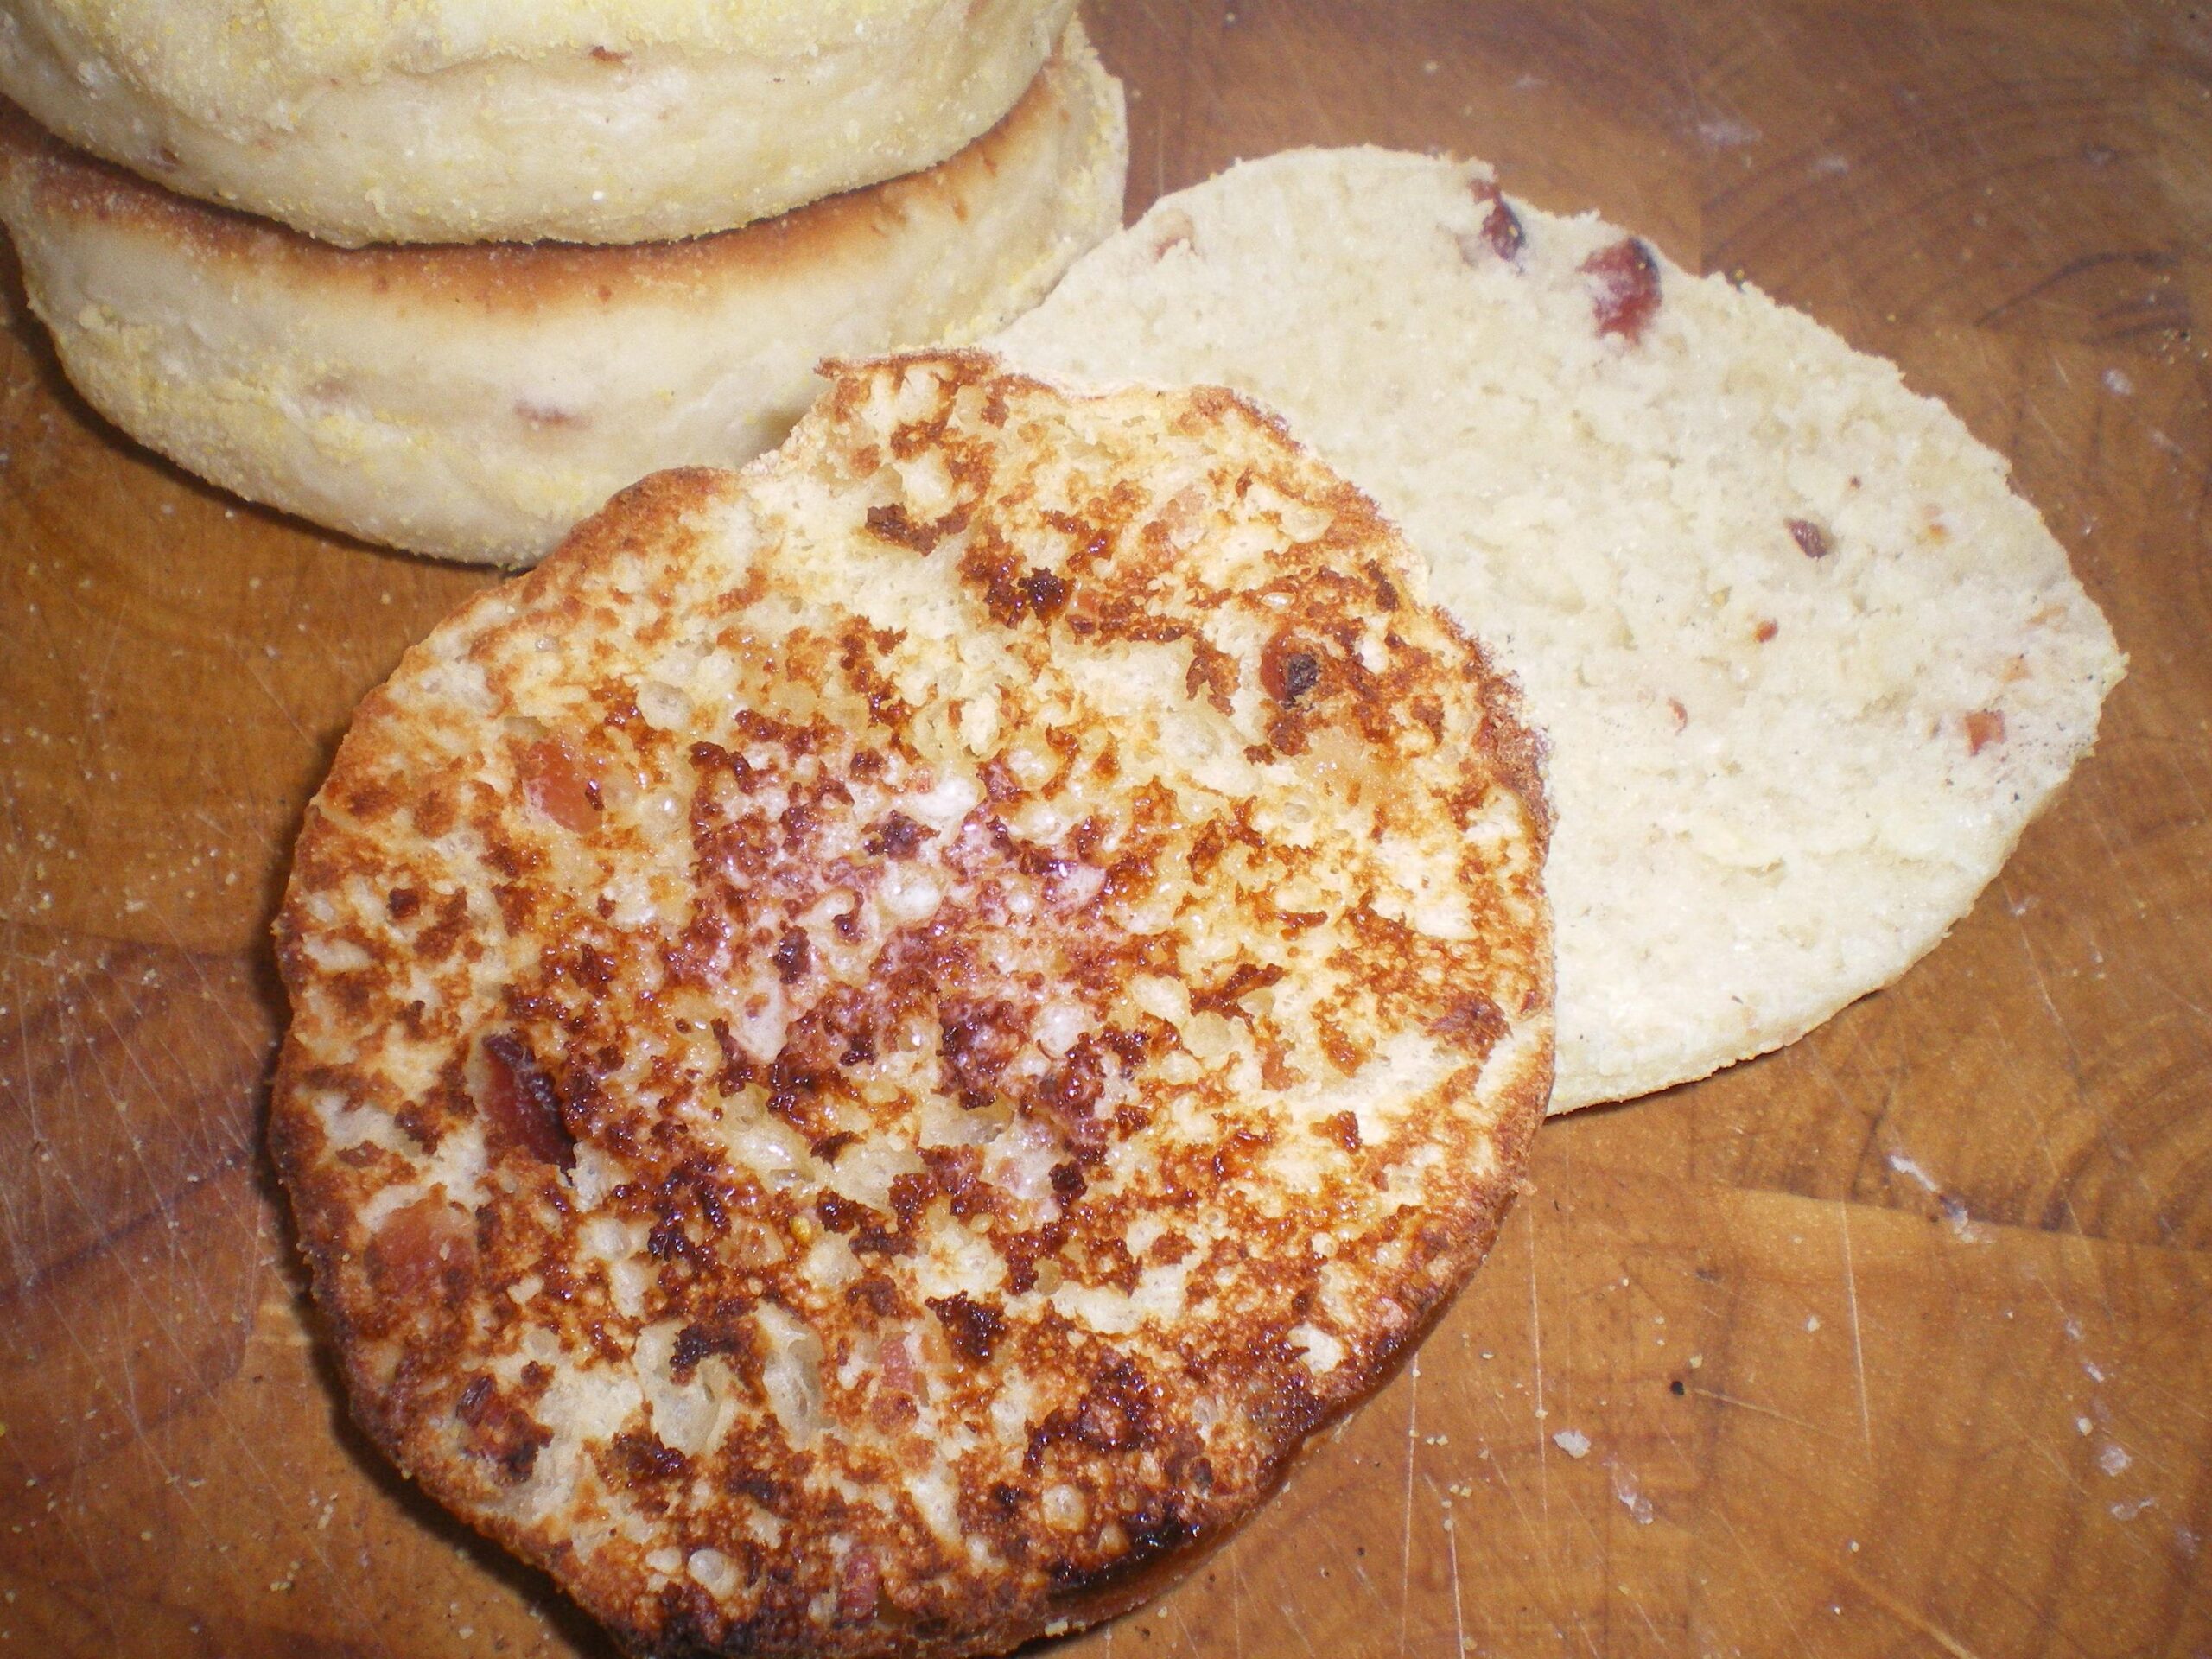  These Bacon English Muffins are an easy breakfast option for on-the-go mornings.